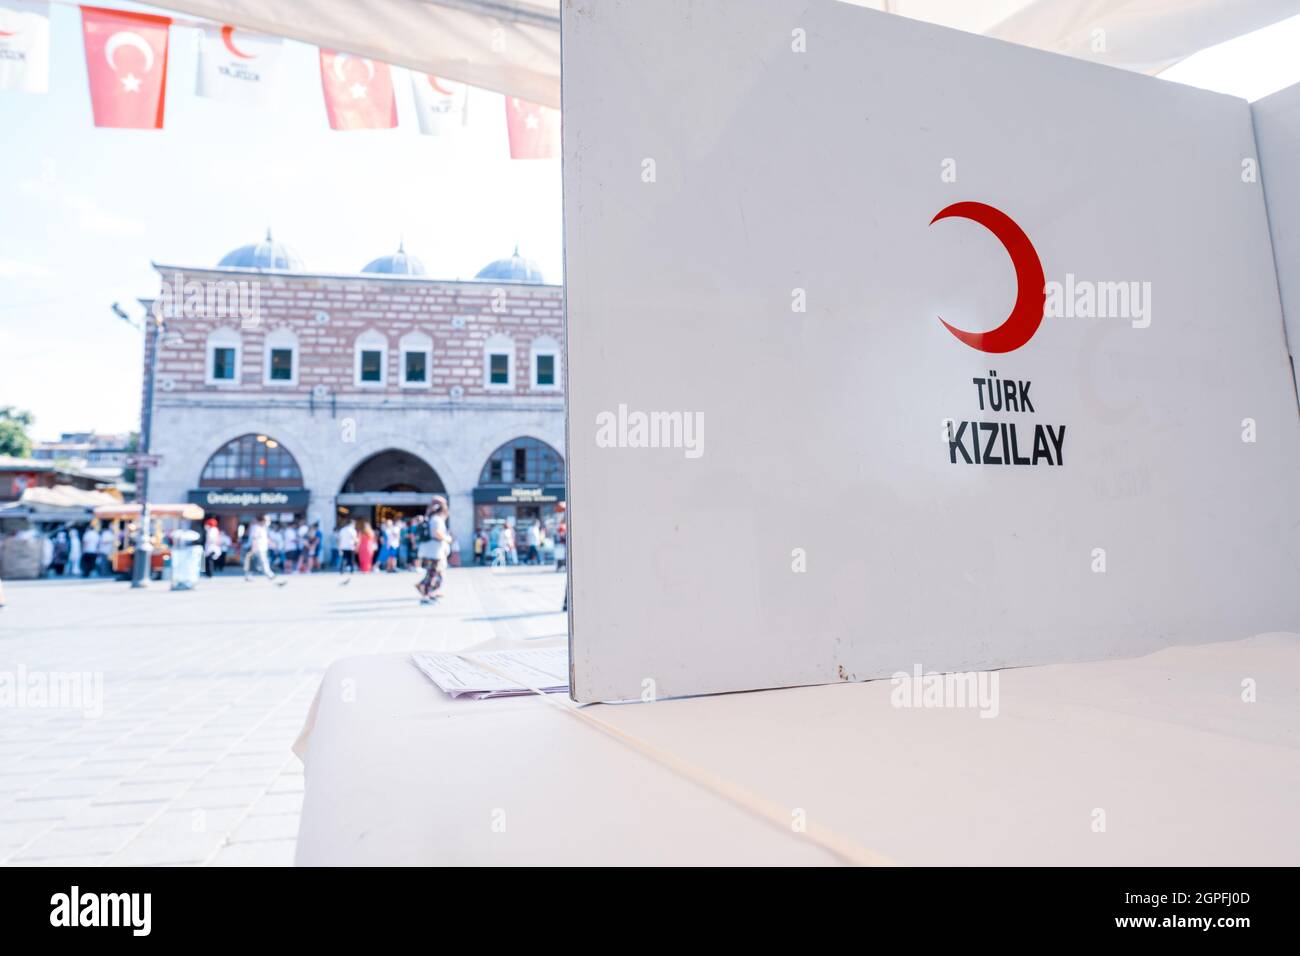 Eminonu, Istanbul, Turkey - 07.05.2021: logo of Turkish Red Crescent (Türk Kizilay) on white table where volunteers sign approval documents in a crowd Stock Photo